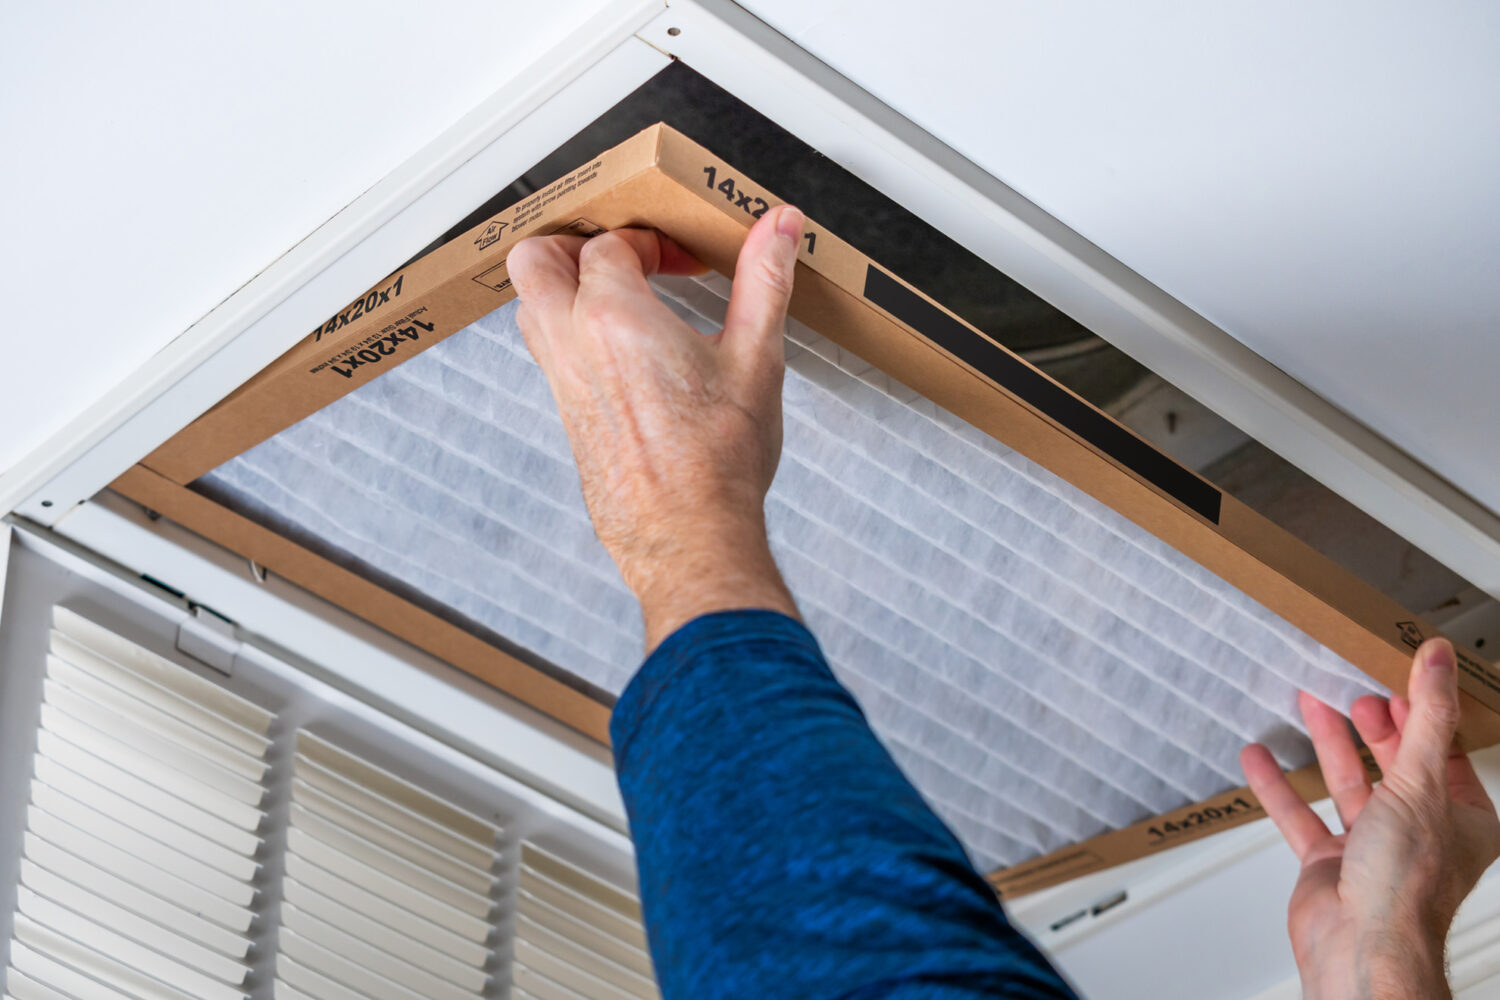 The Ultimate Home and HVAC Checklist to Prepare Your Home for Fall